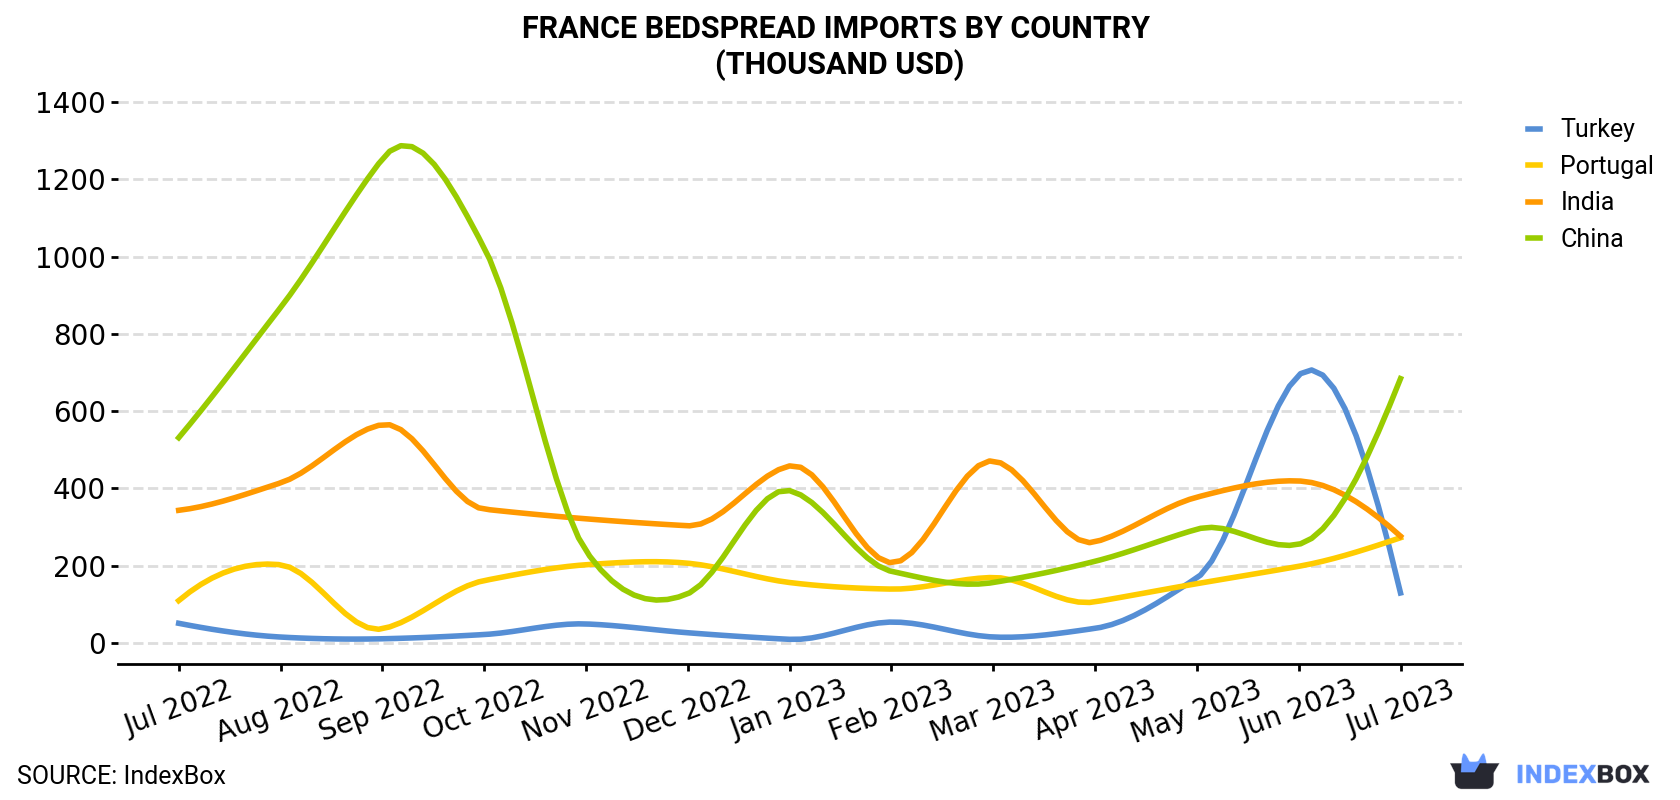 France Bedspread Imports By Country (Thousand USD)